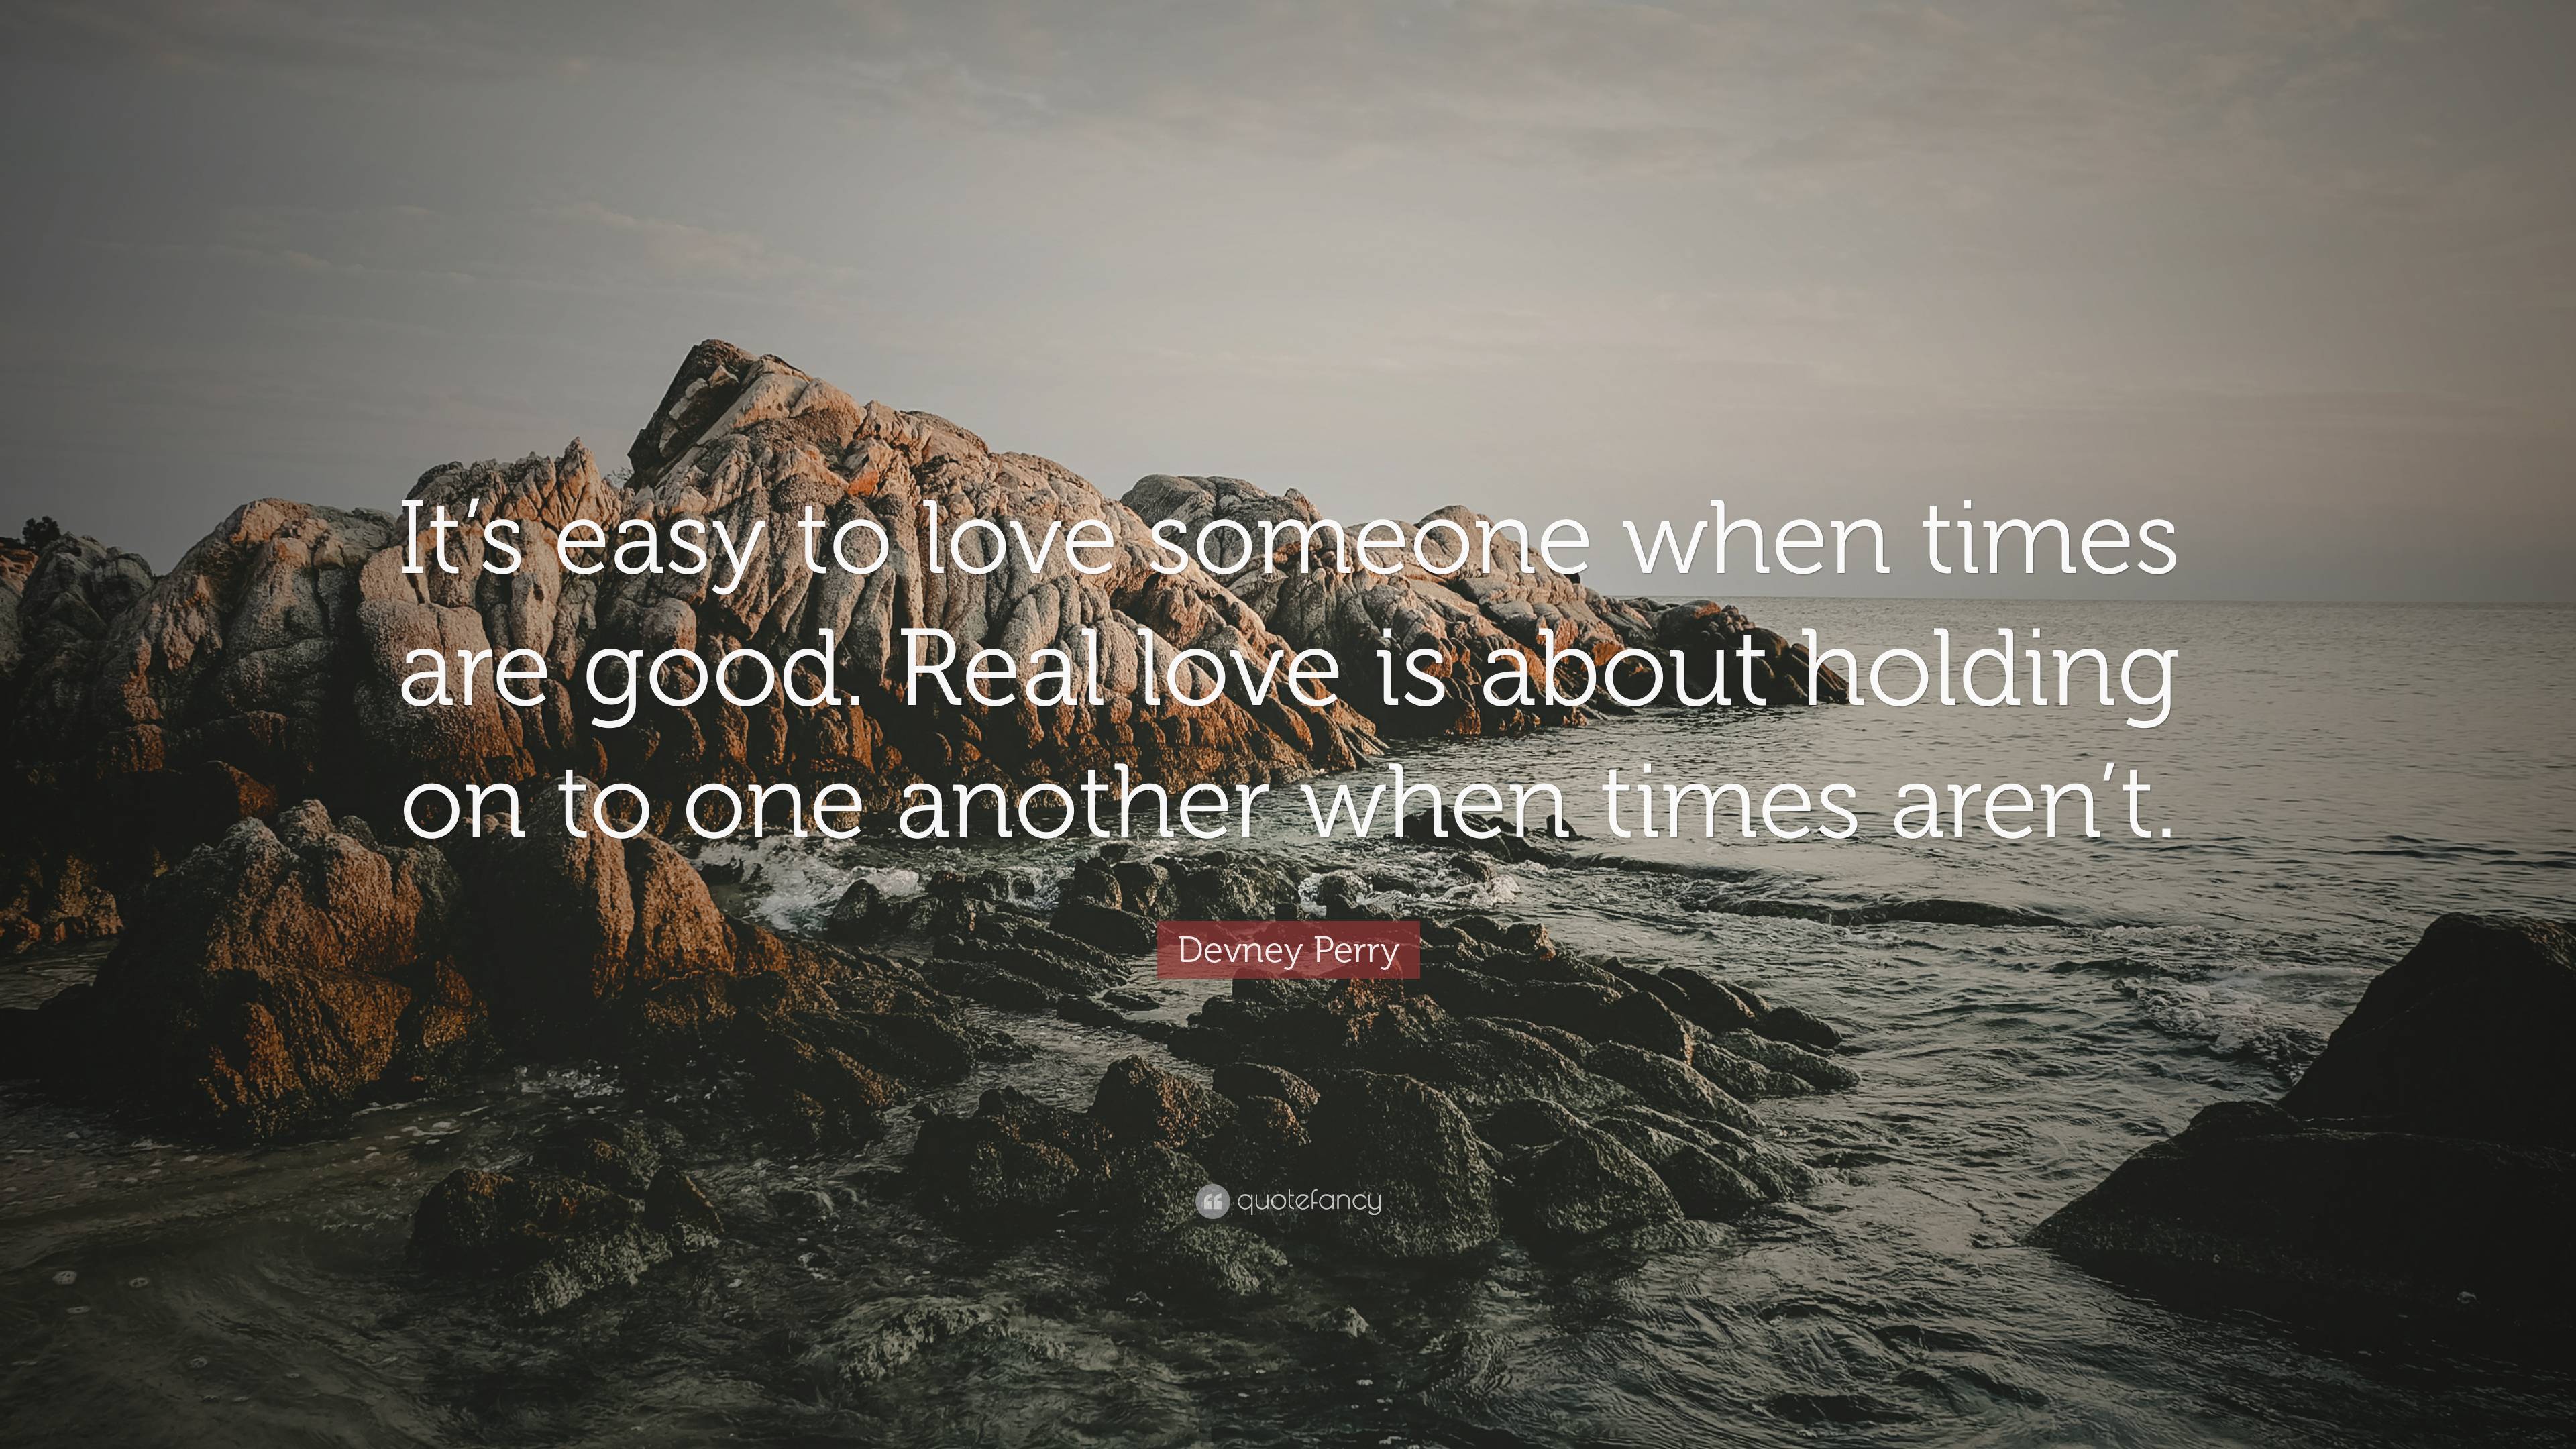 Devney Perry Quote: “It's easy to love someone when times are good